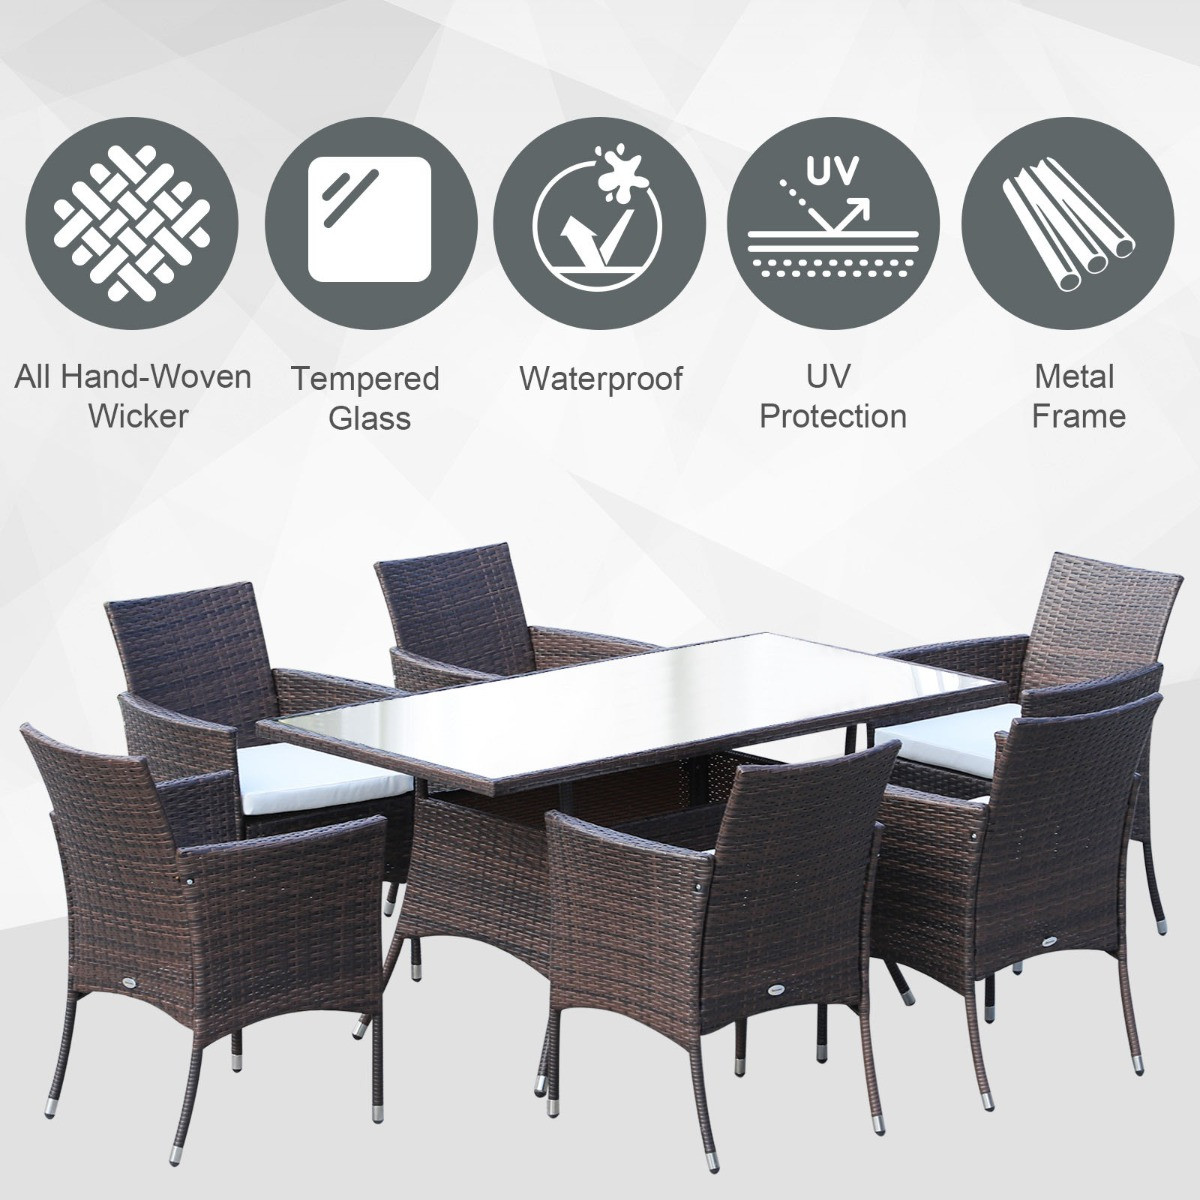 Outsunny Rattan Garden Furniture Dining Set, 7 Piece - Brown>